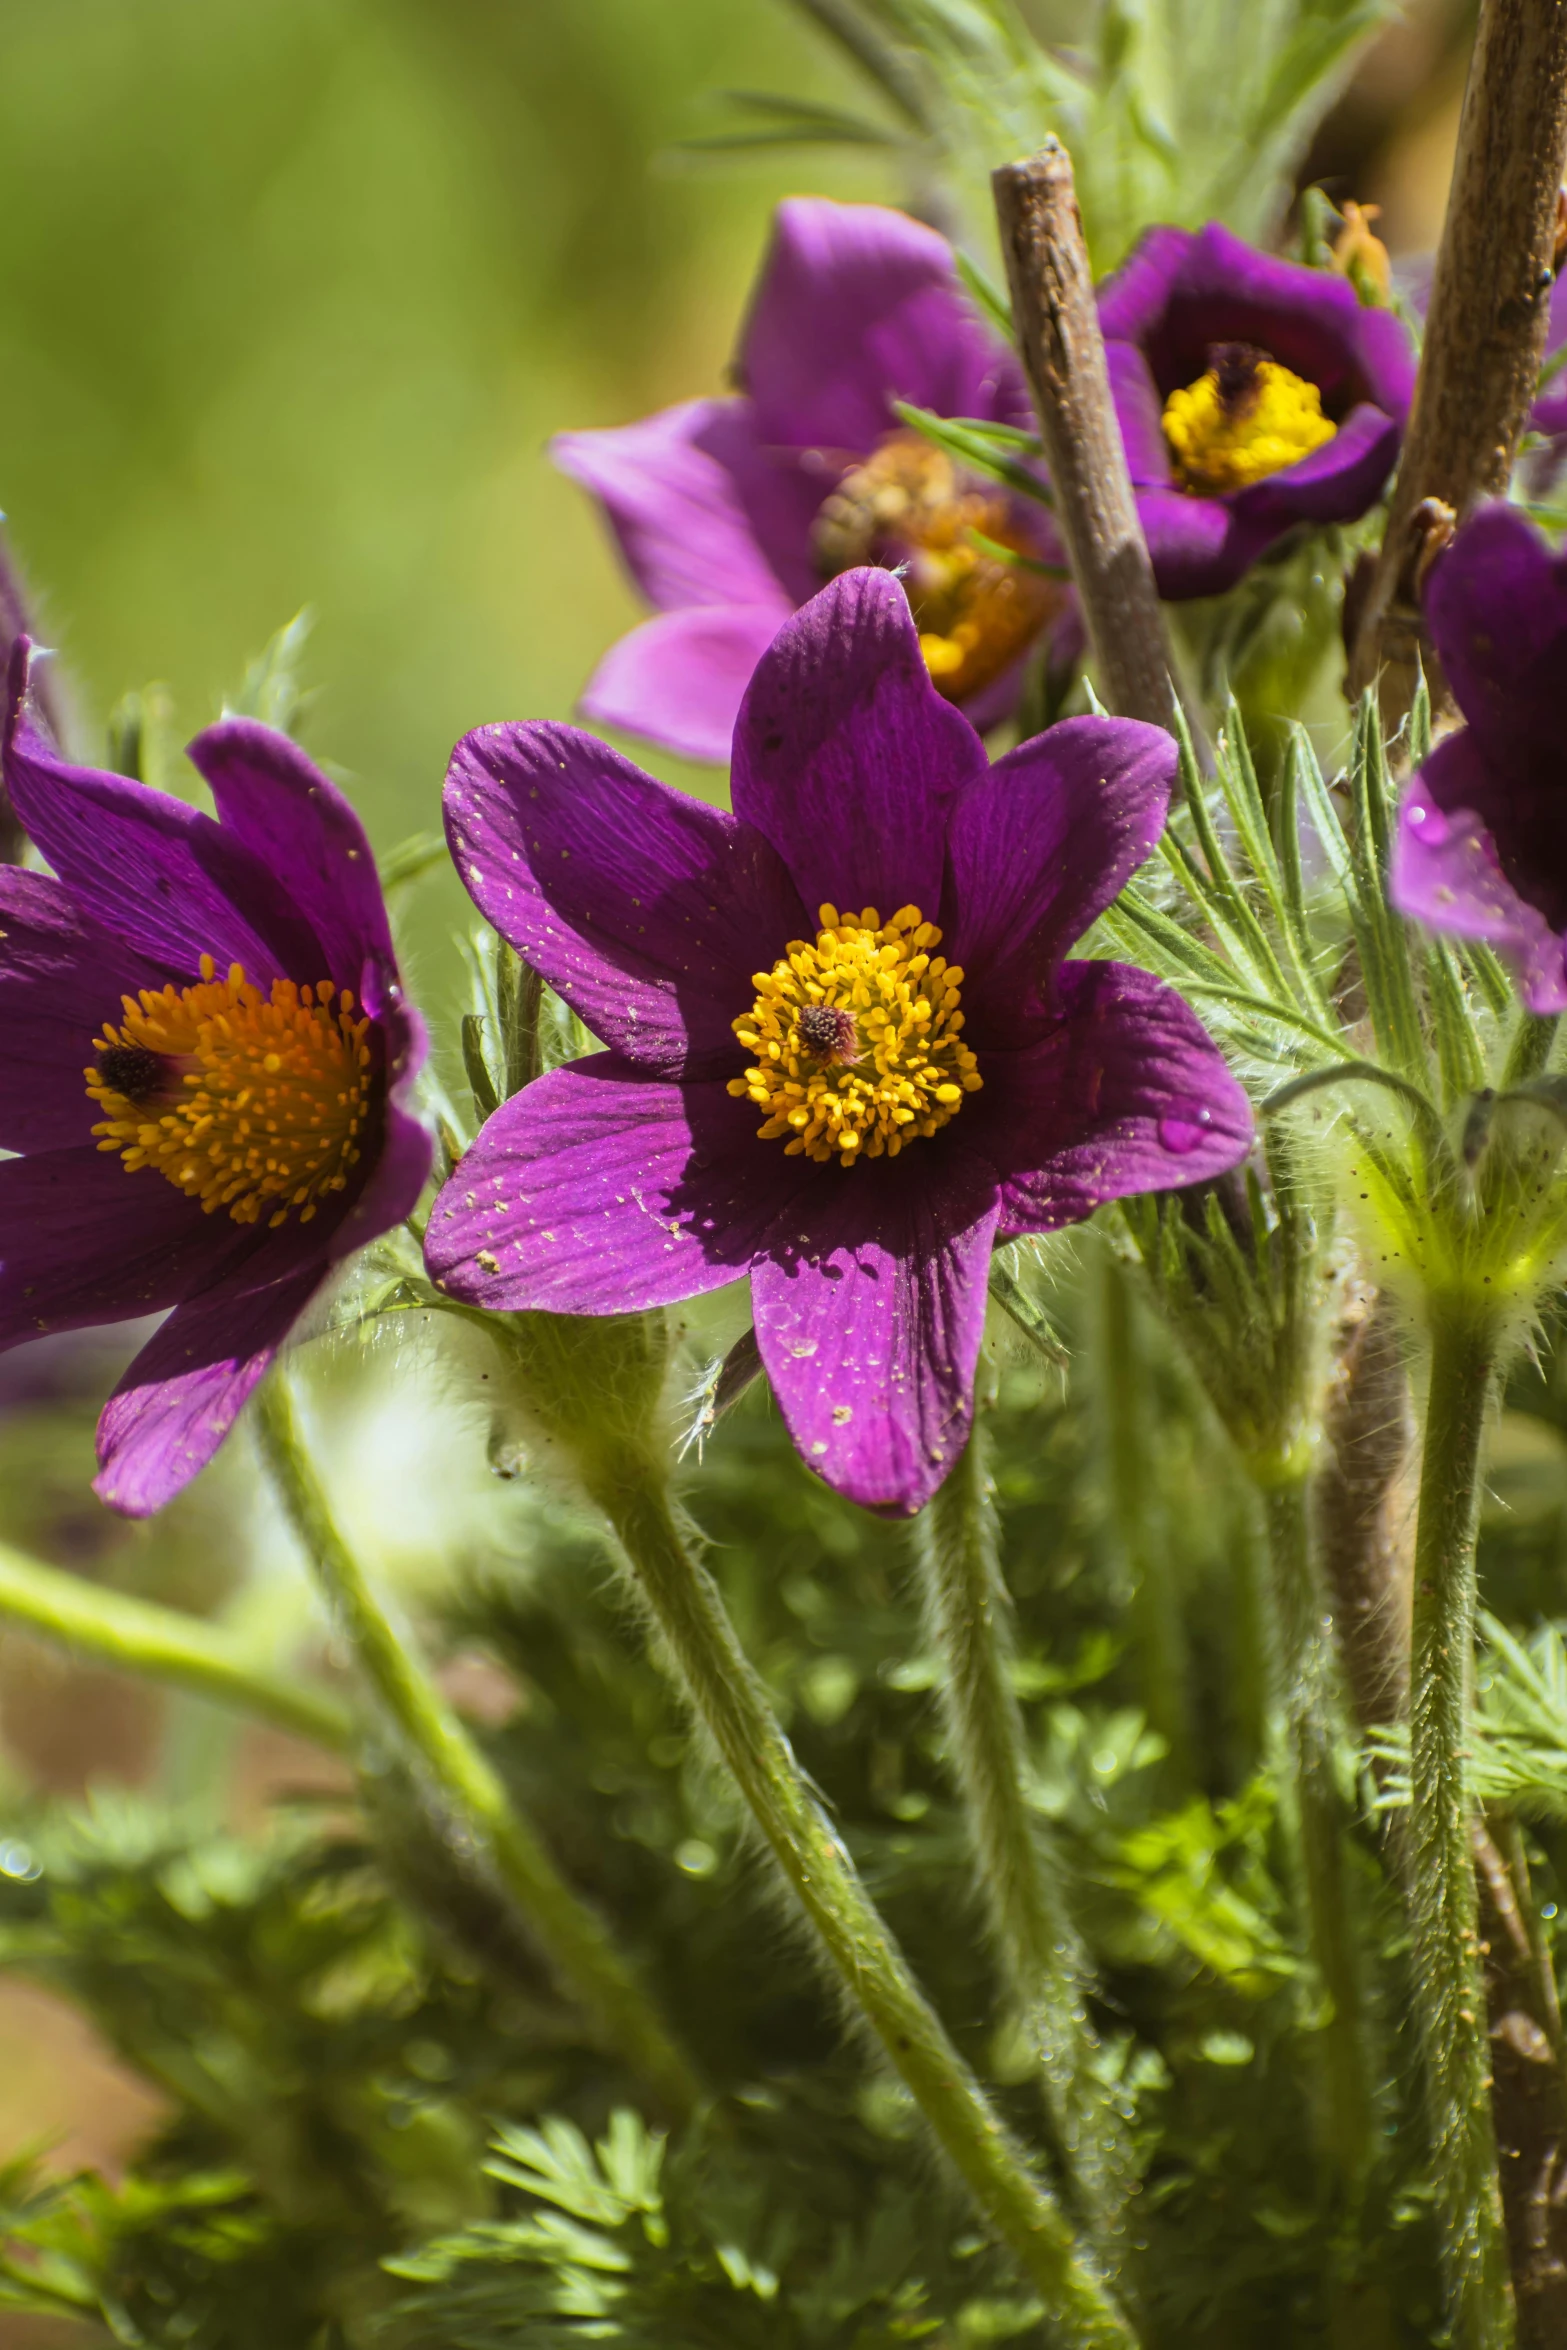 purple flowers with yellow center and green stems